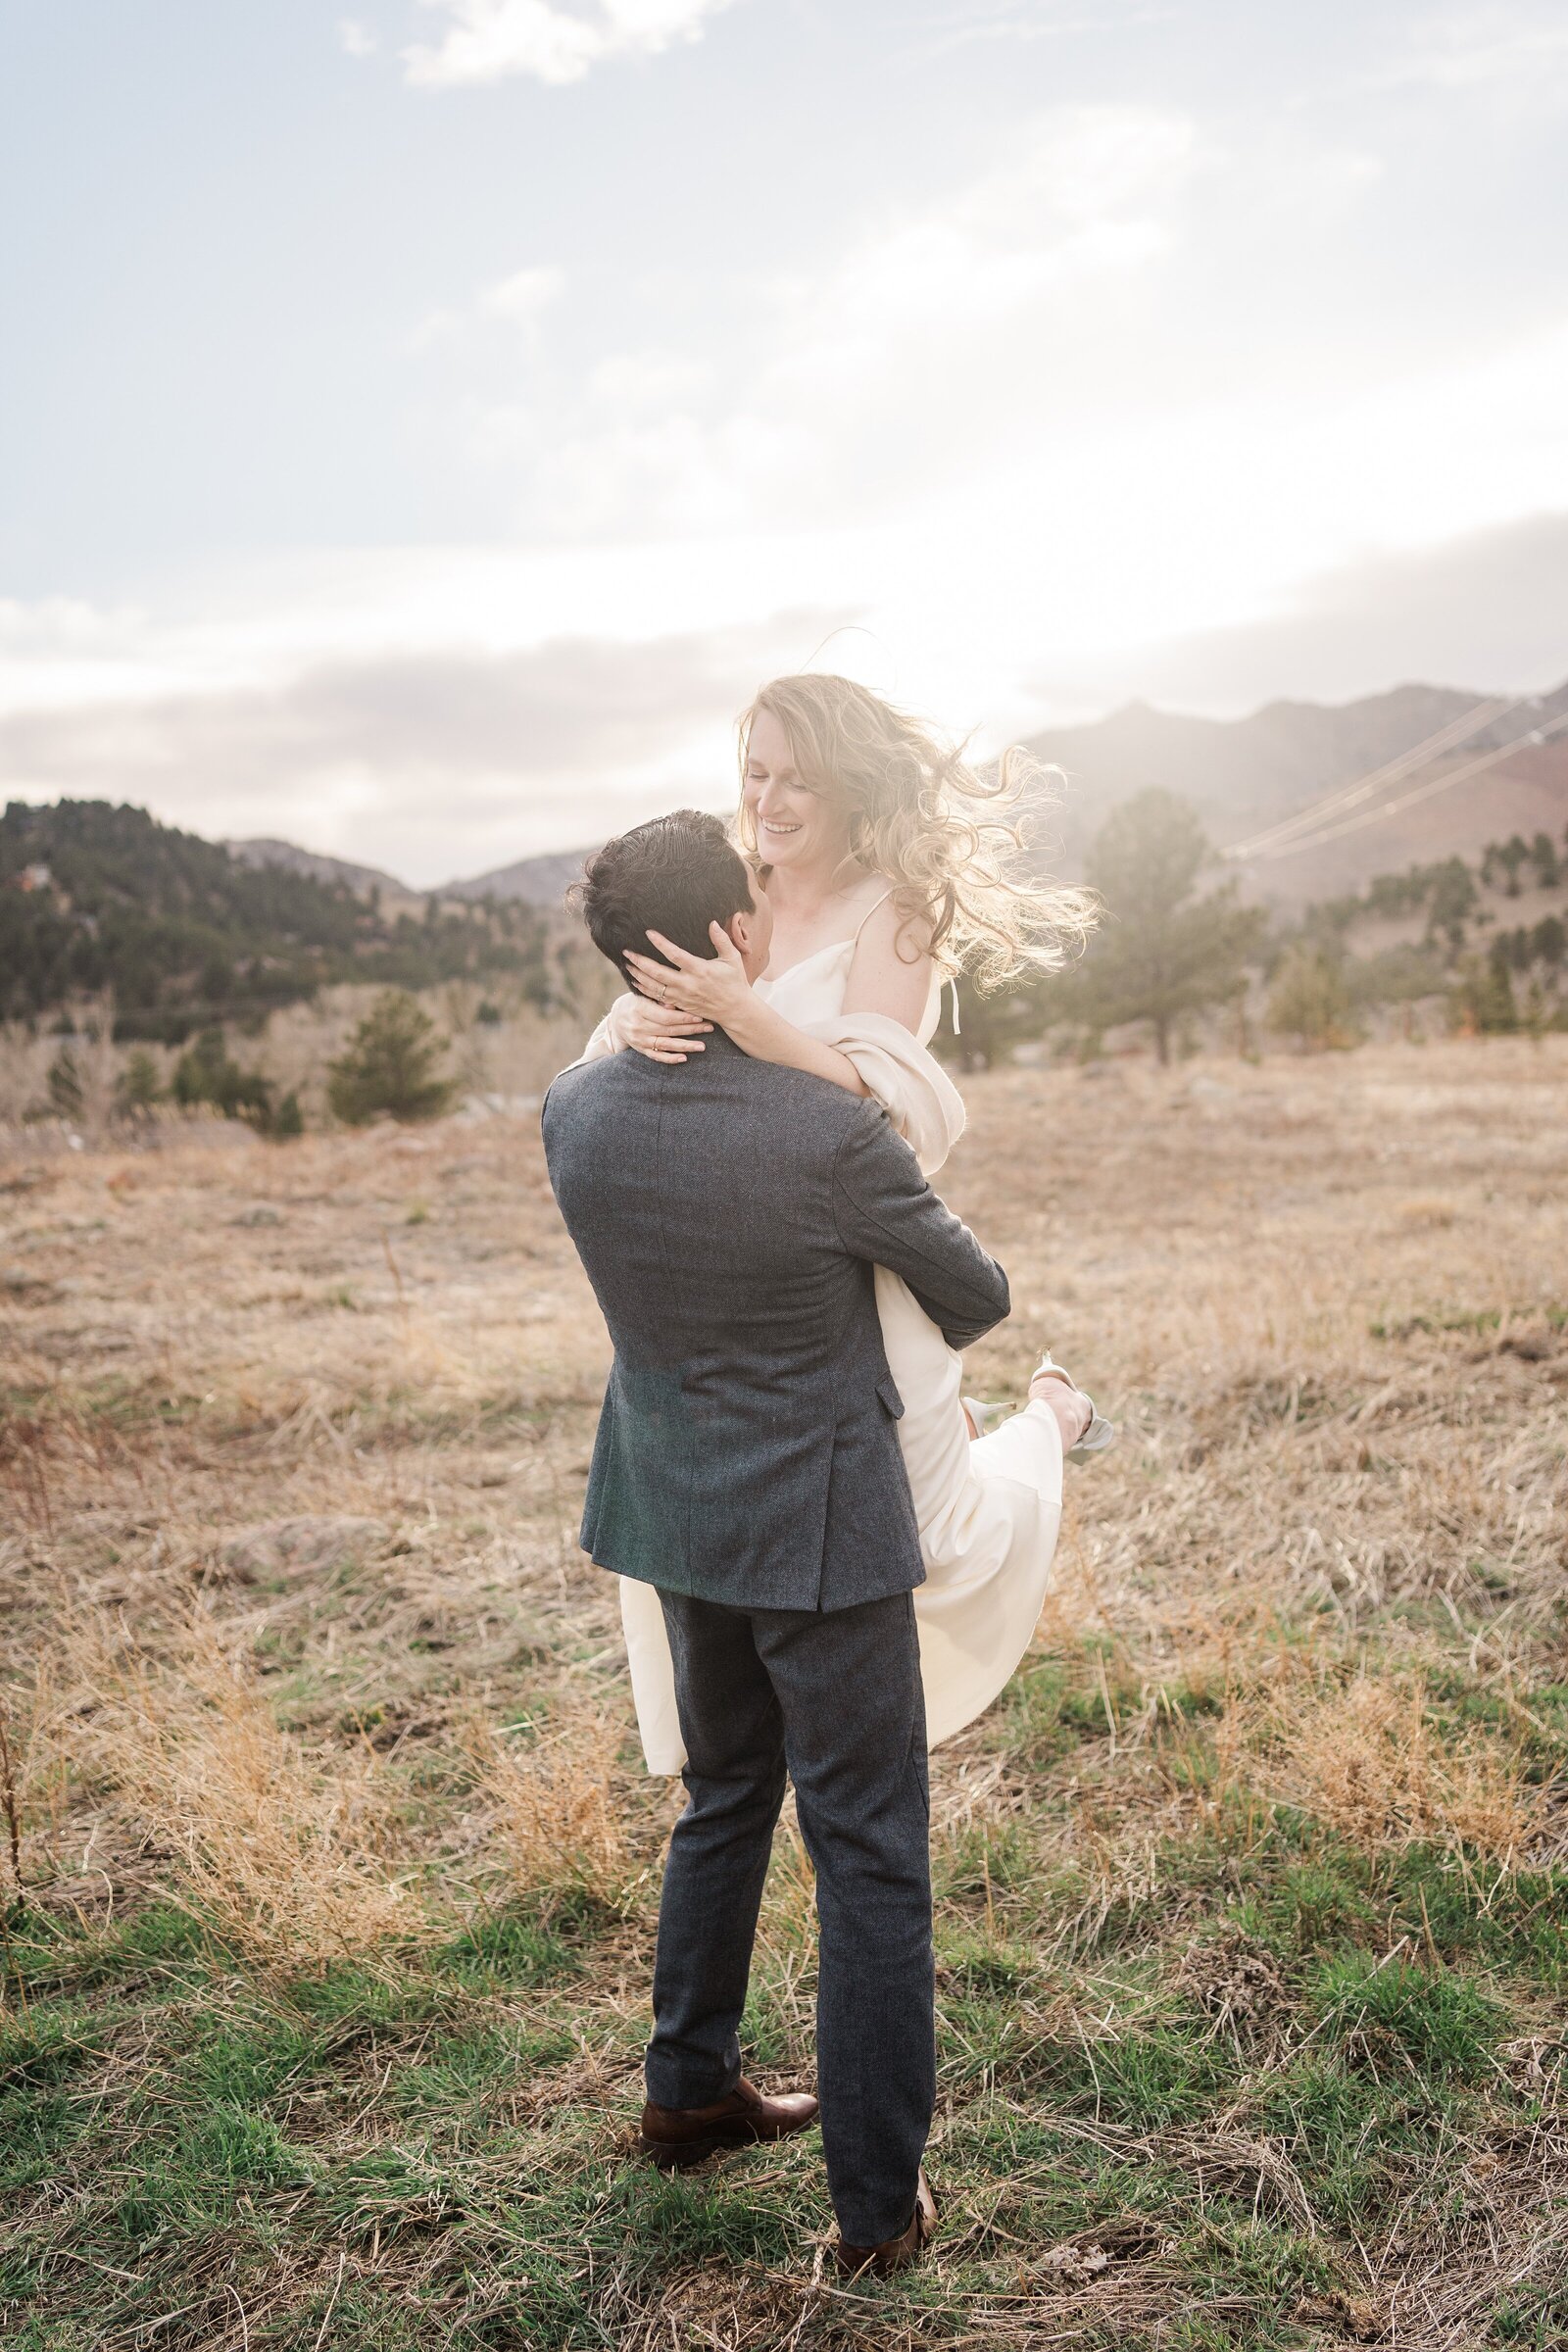 Immerse yourself in the beauty of the great outdoors with a scenic wedding photoshoot. Samantha Immer uses natural light and stunning landscapes to capture your special day.